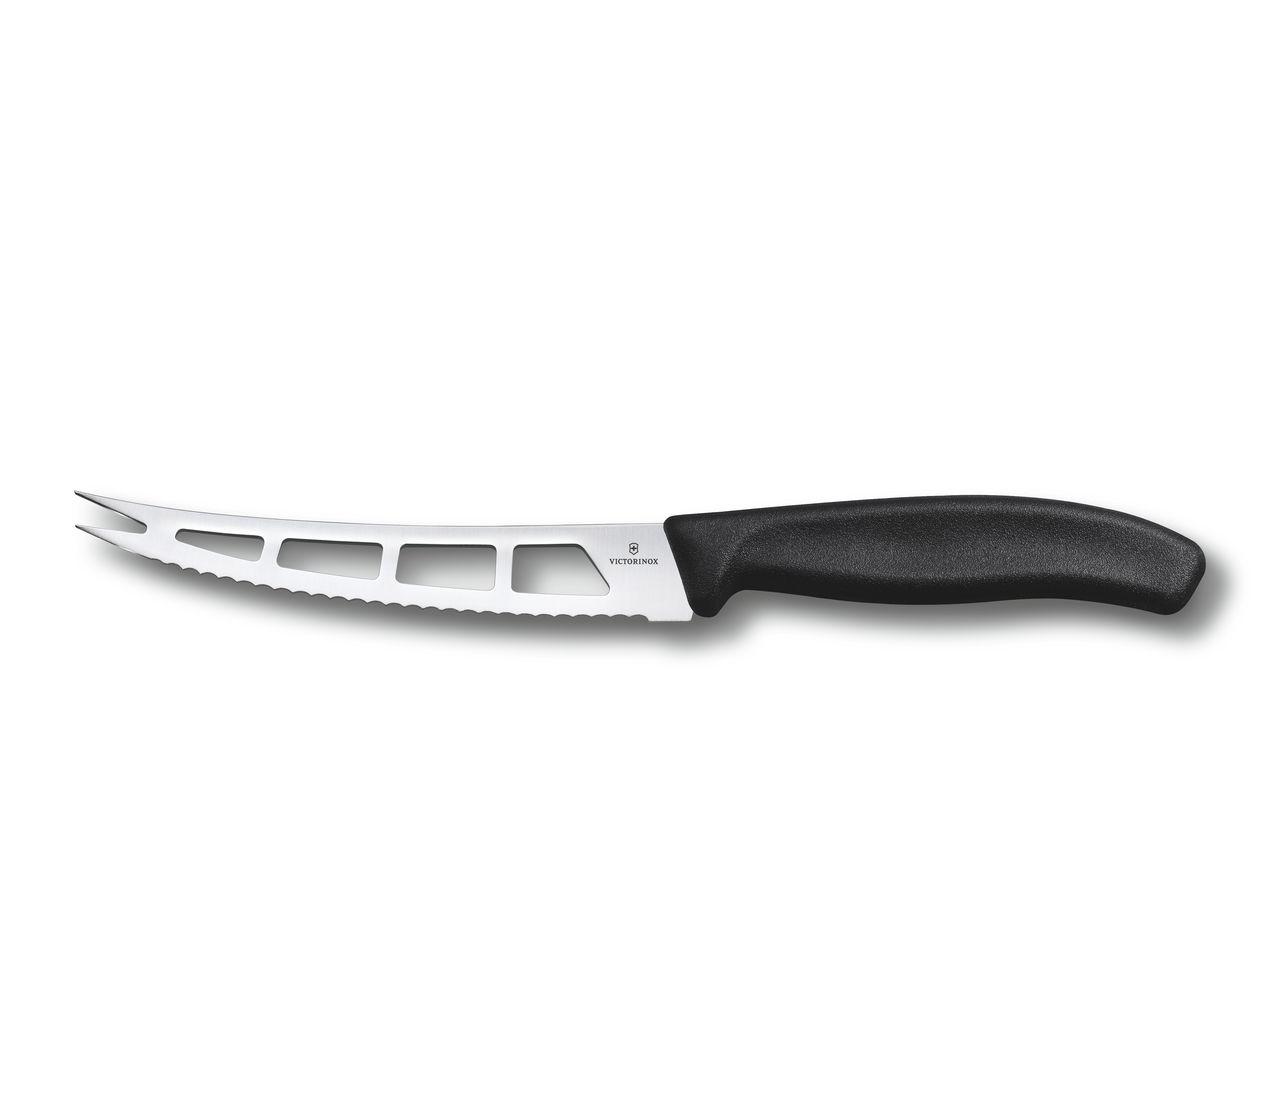 Swiss Classic Butter and Cream Cheese Knife-6.7863.13B